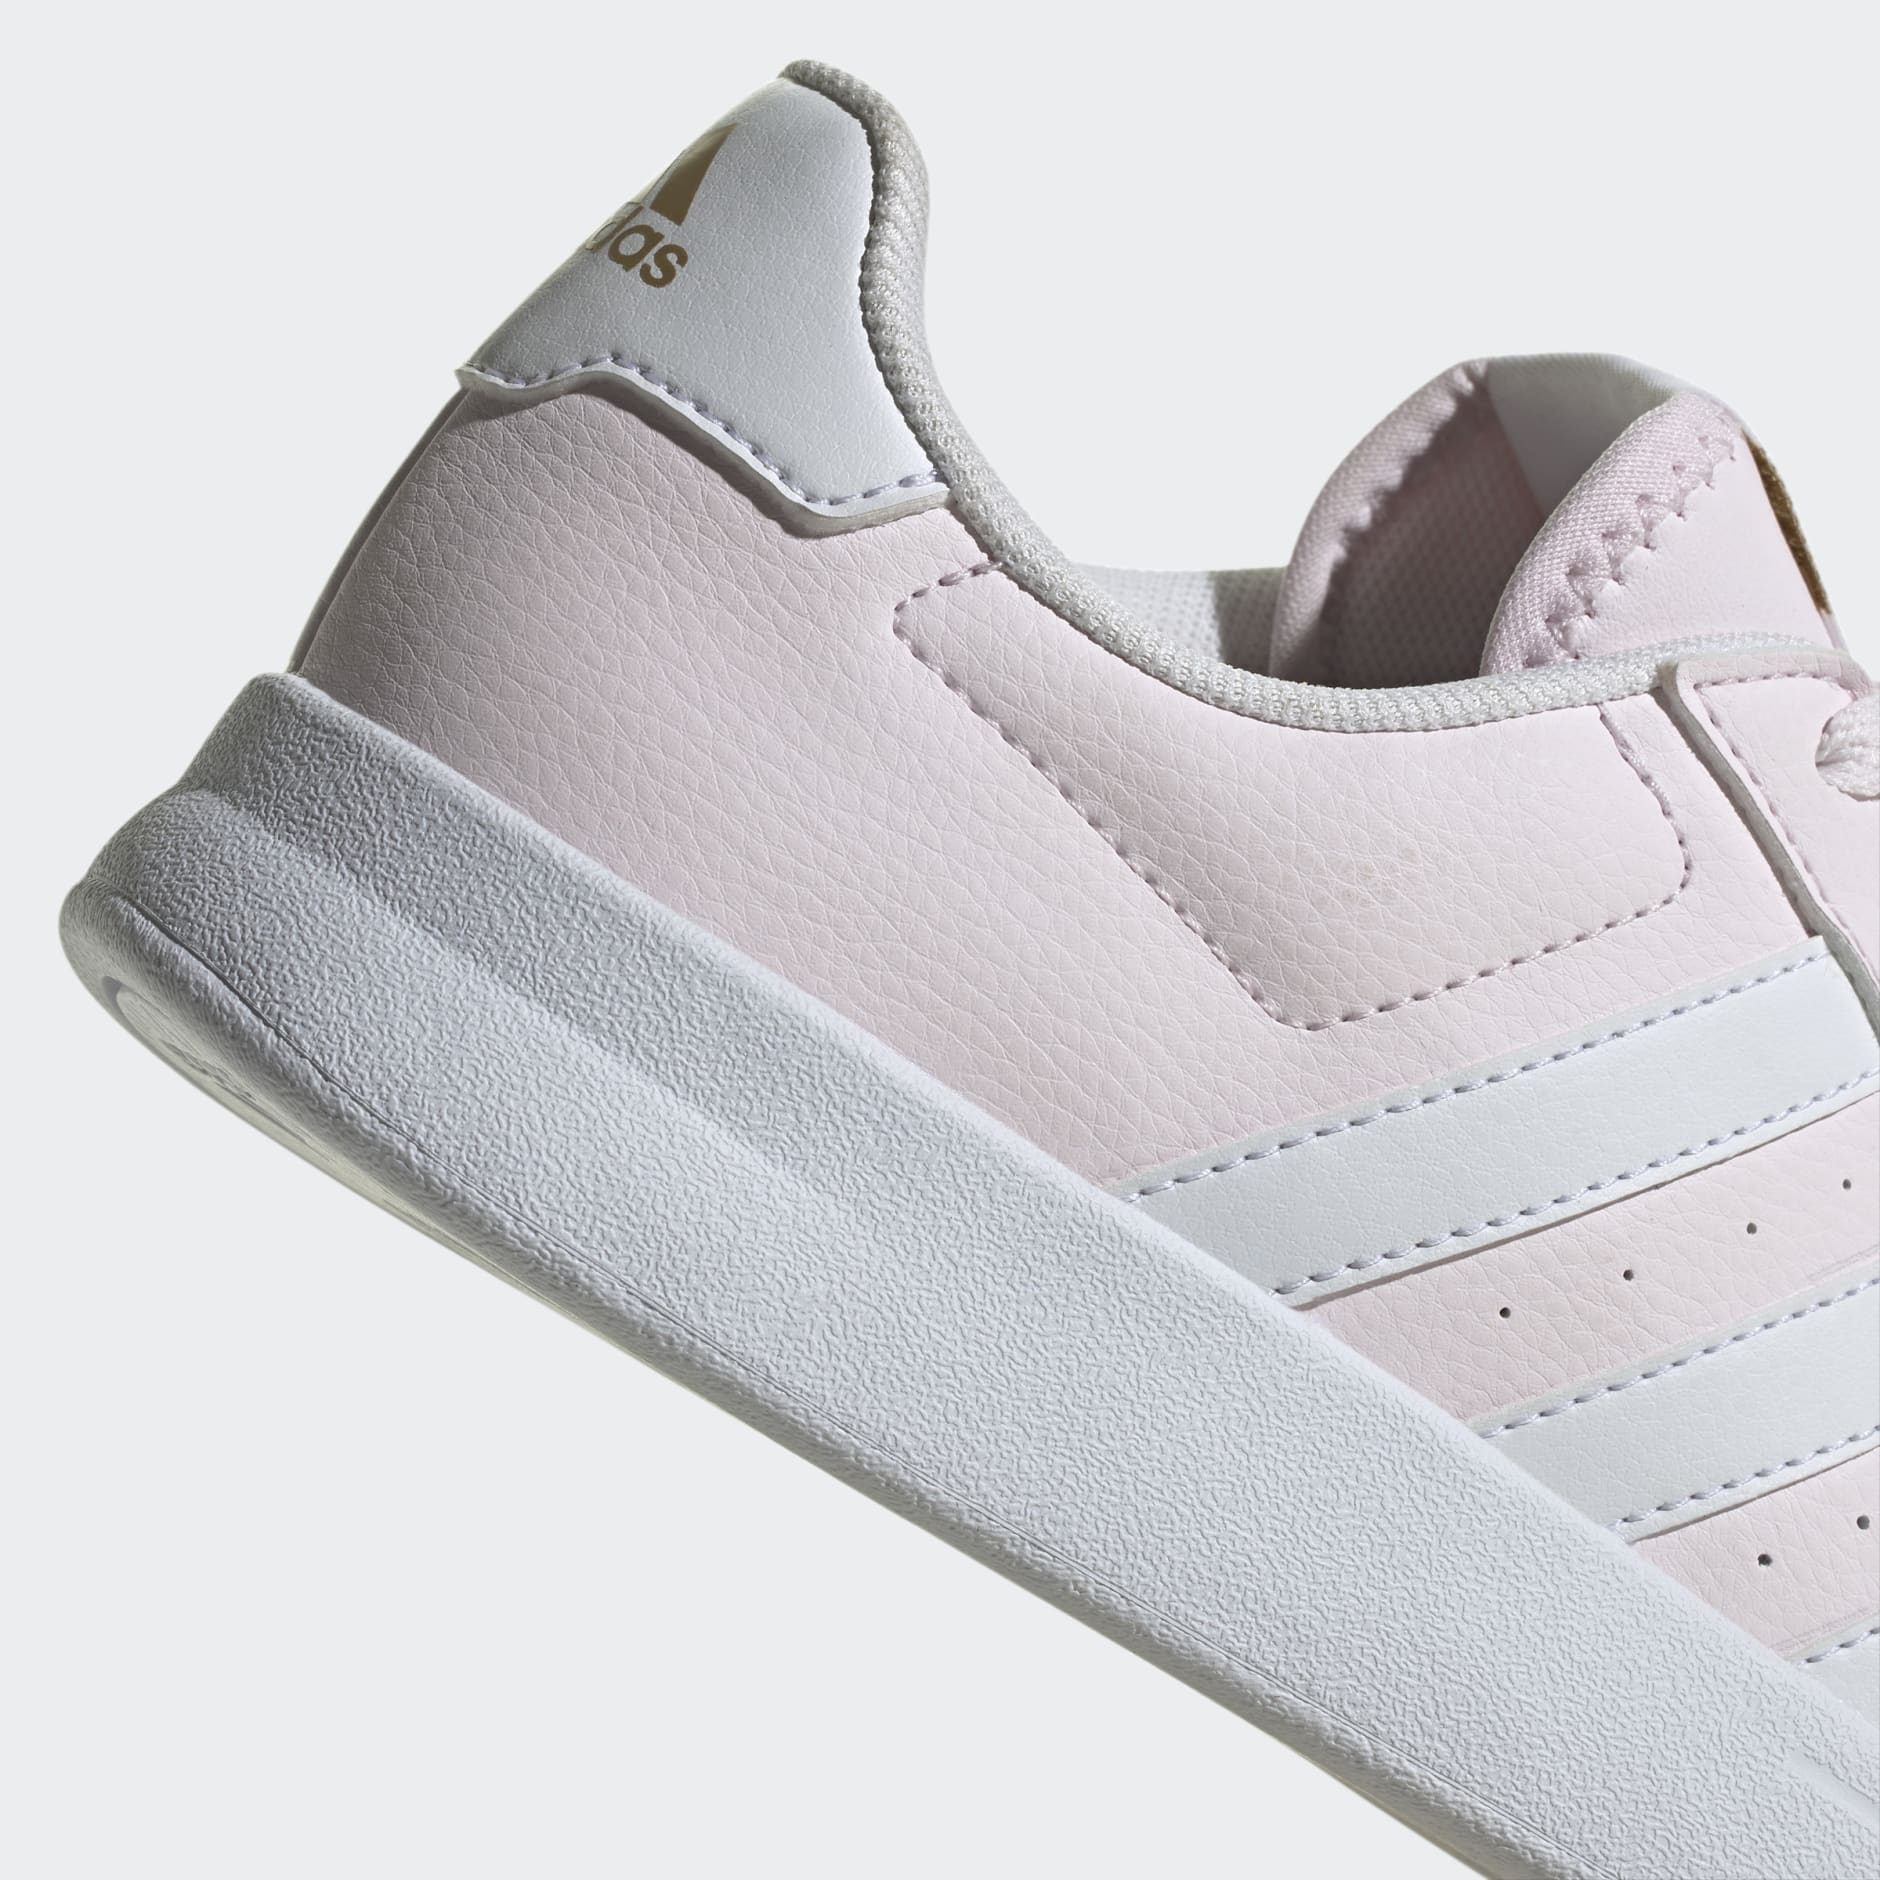 Shoes - Breaknet 2.0 Shoes - Pink | adidas South Africa